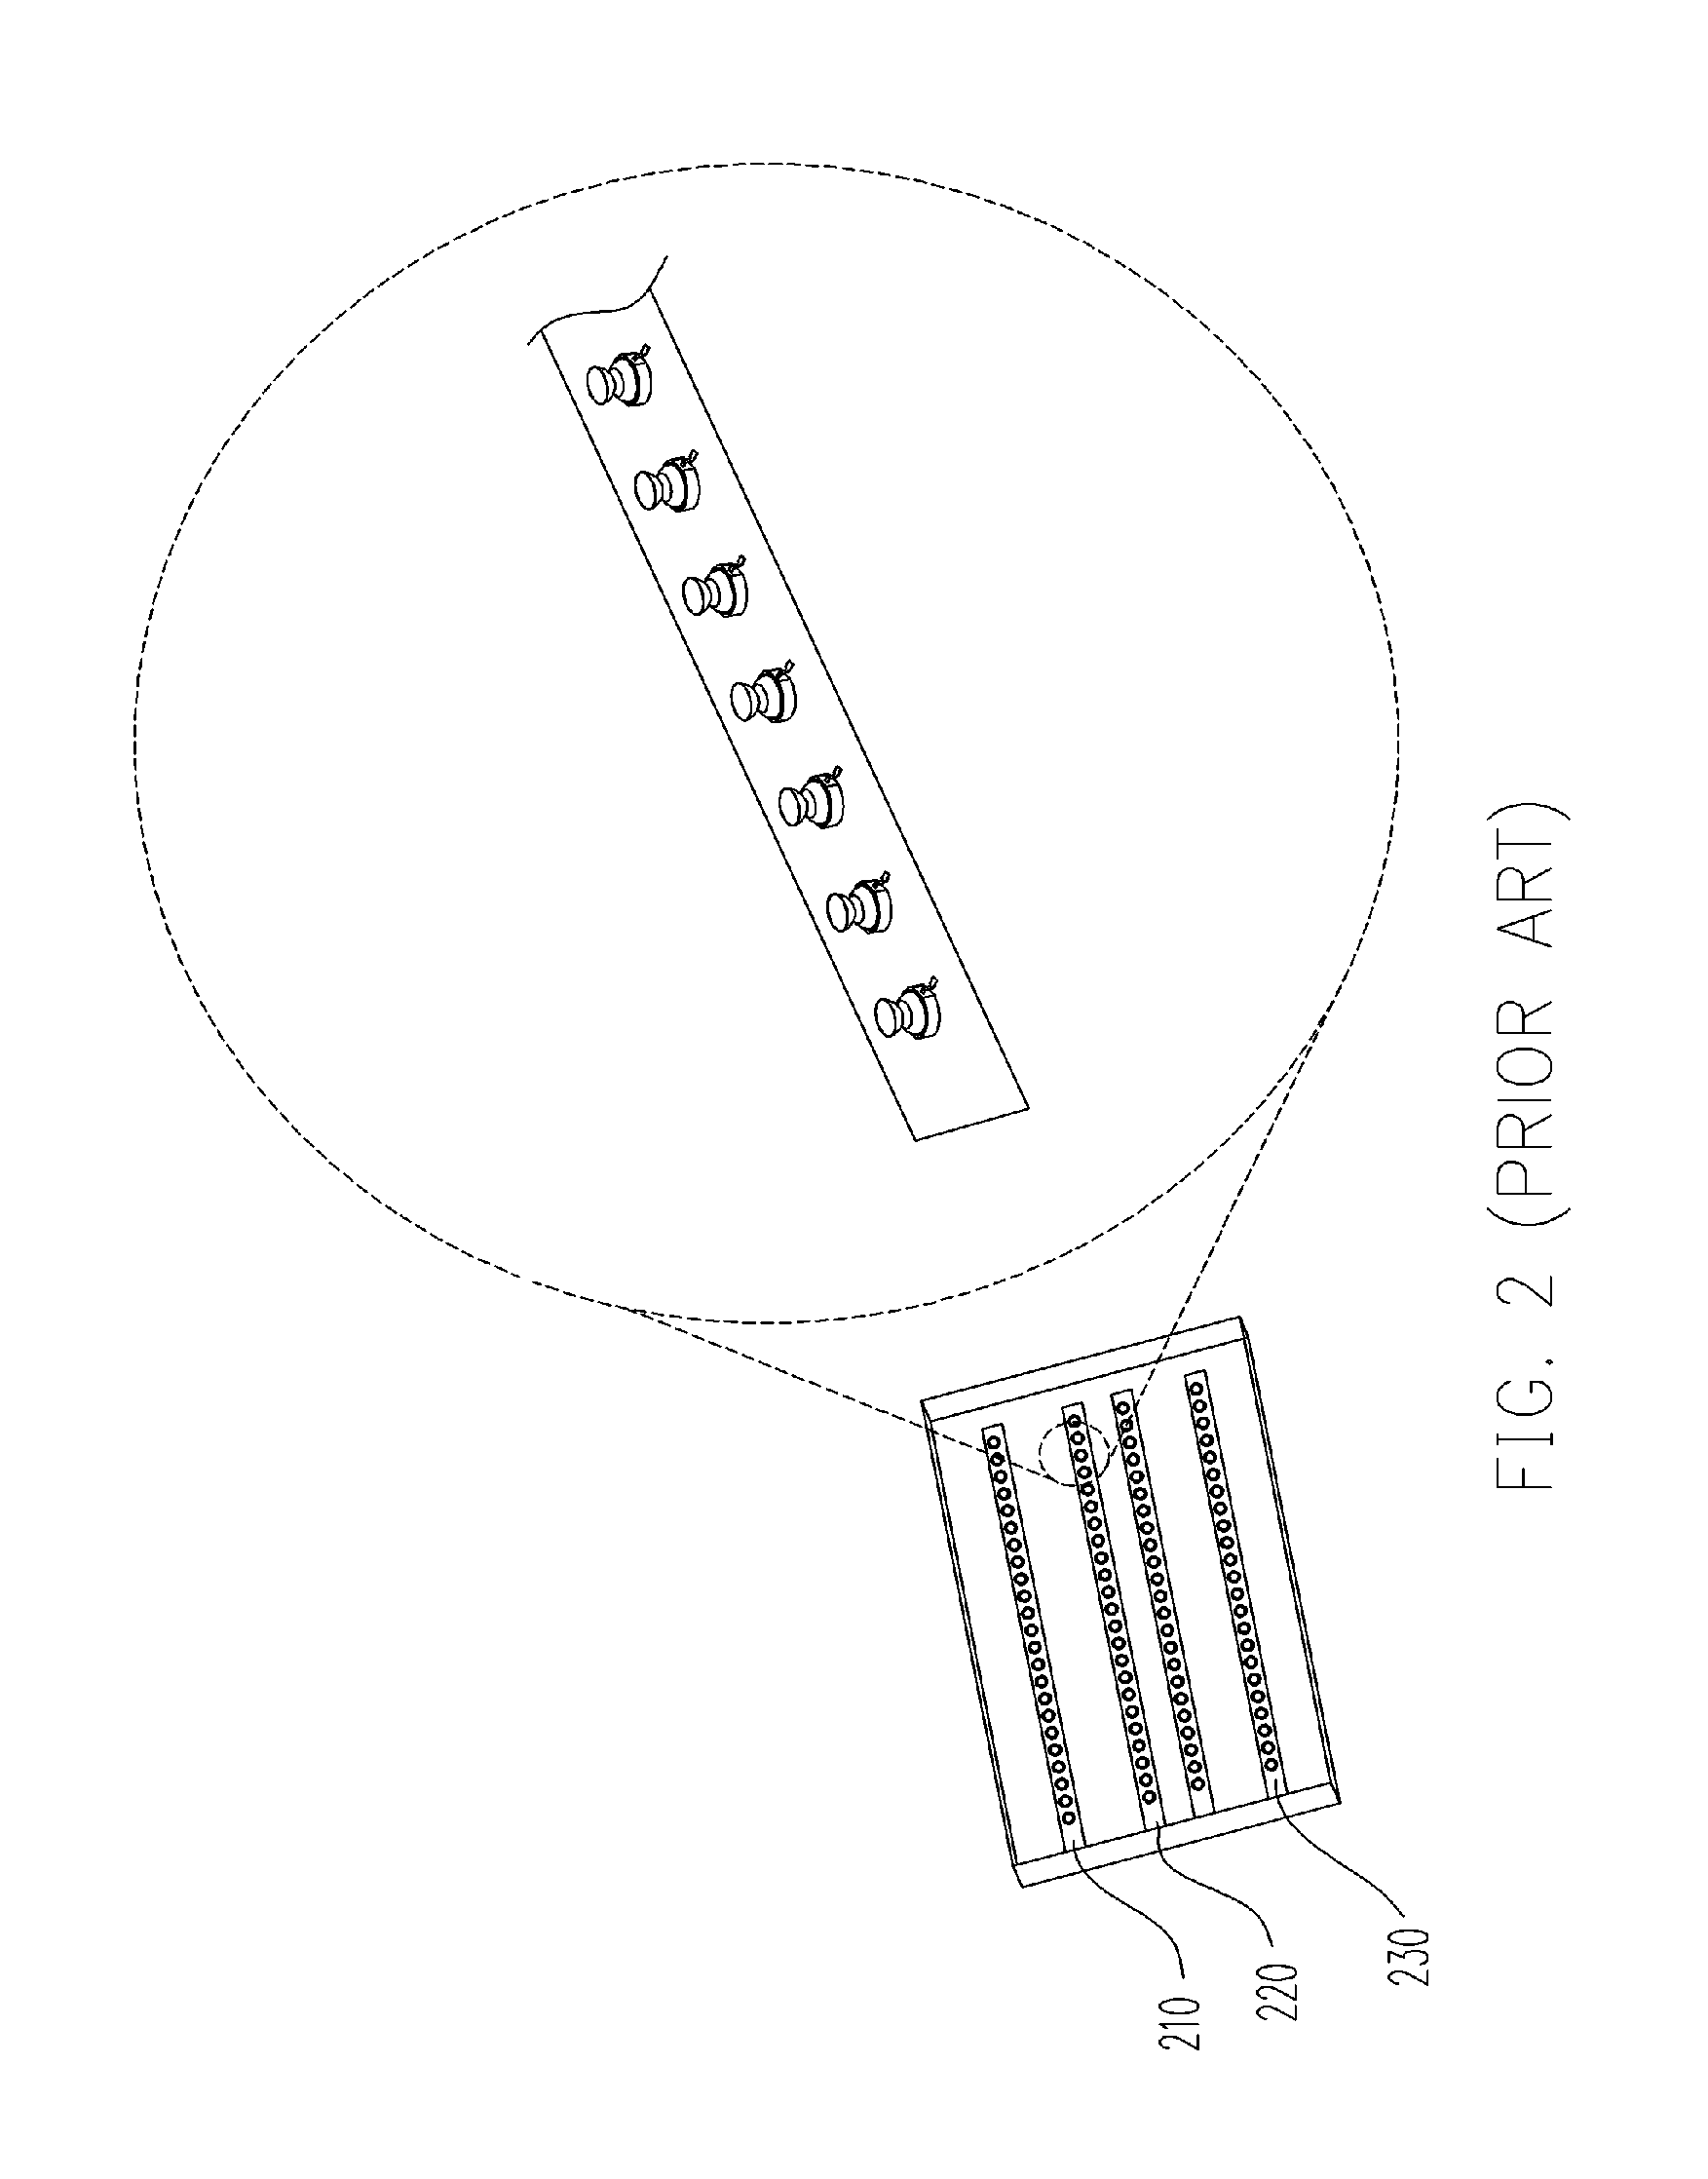 Bendable solid state planar light source structure